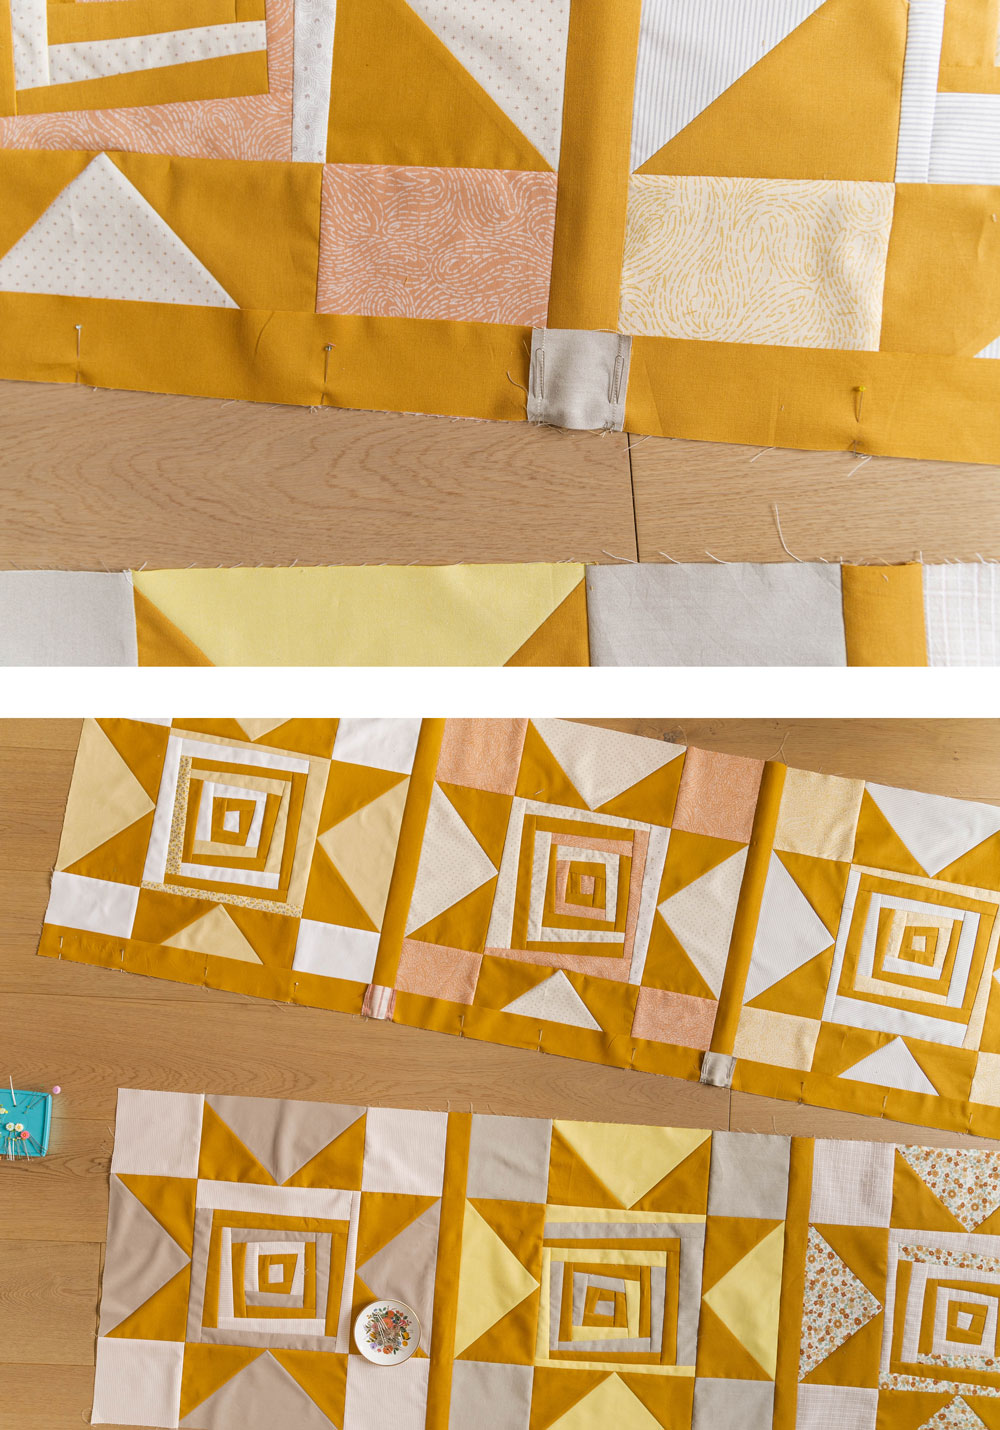 In the final week of the Shining Star quilt sew along we assemble our star blocks and finish the quilt top. Check out my tips for success! suzyquilts.com #sewing #quilting